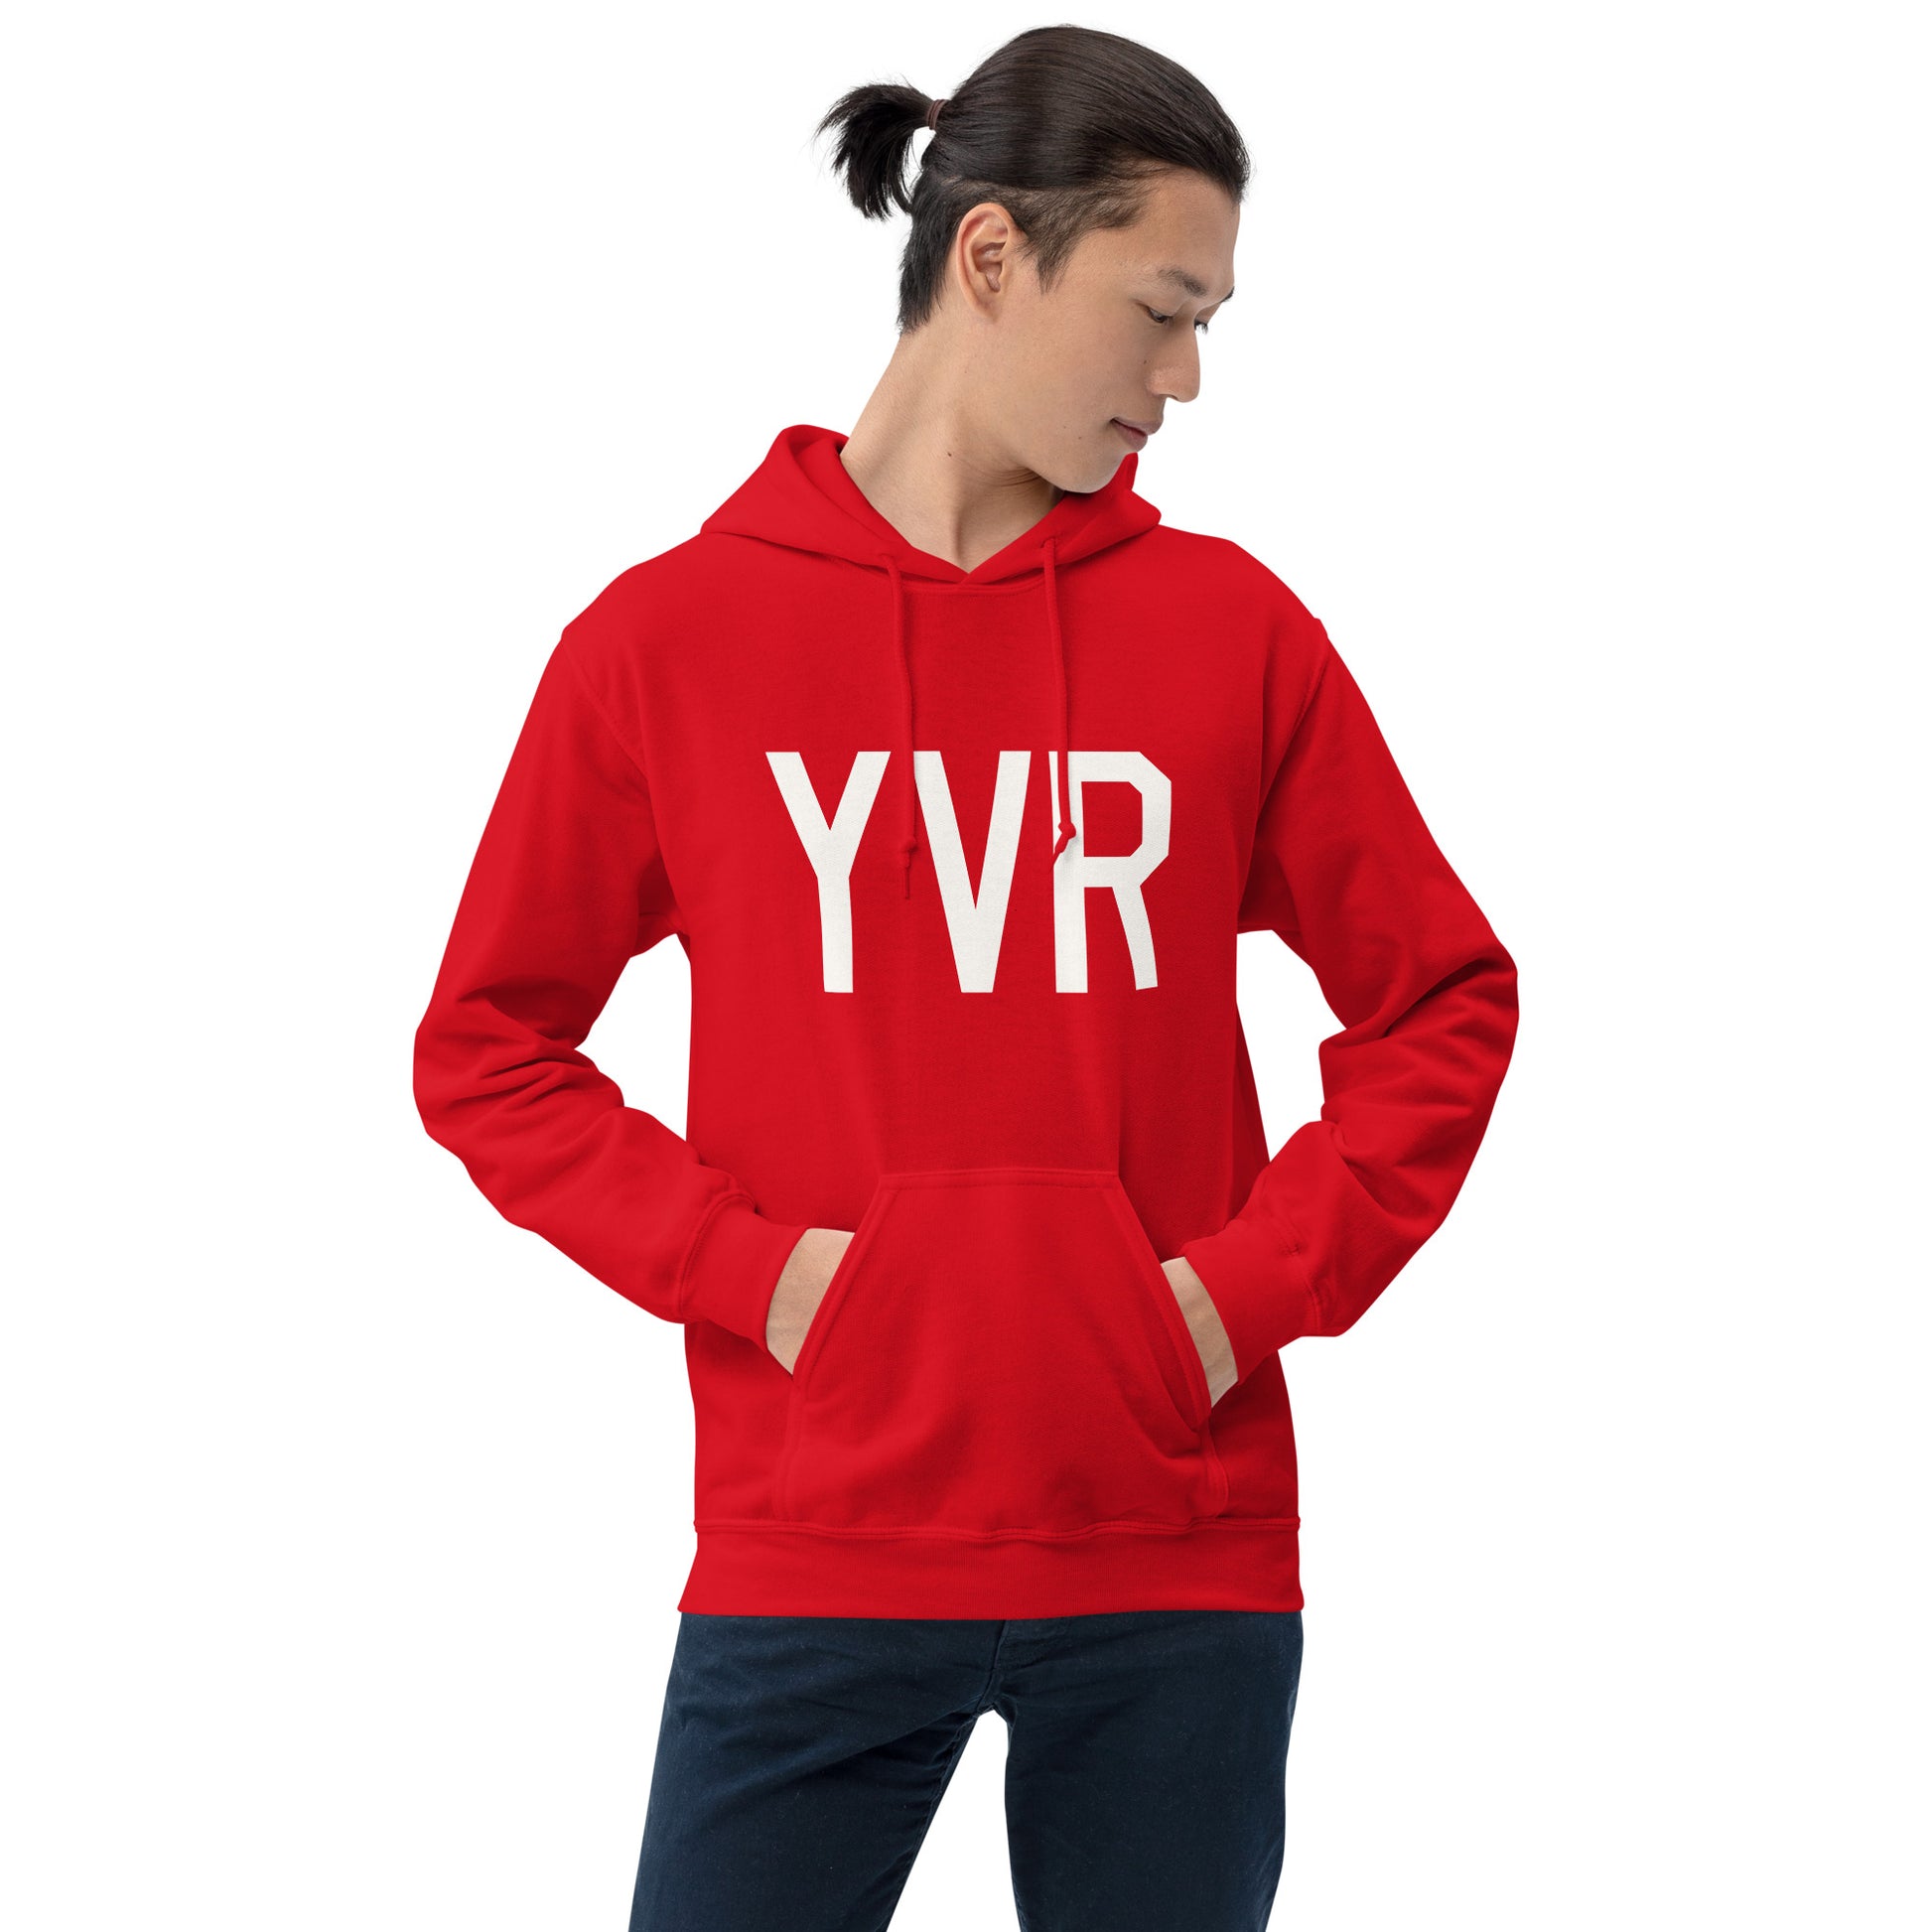 Unisex Hoodie - White Graphic • YVR Vancouver • YHM Designs - Image 11